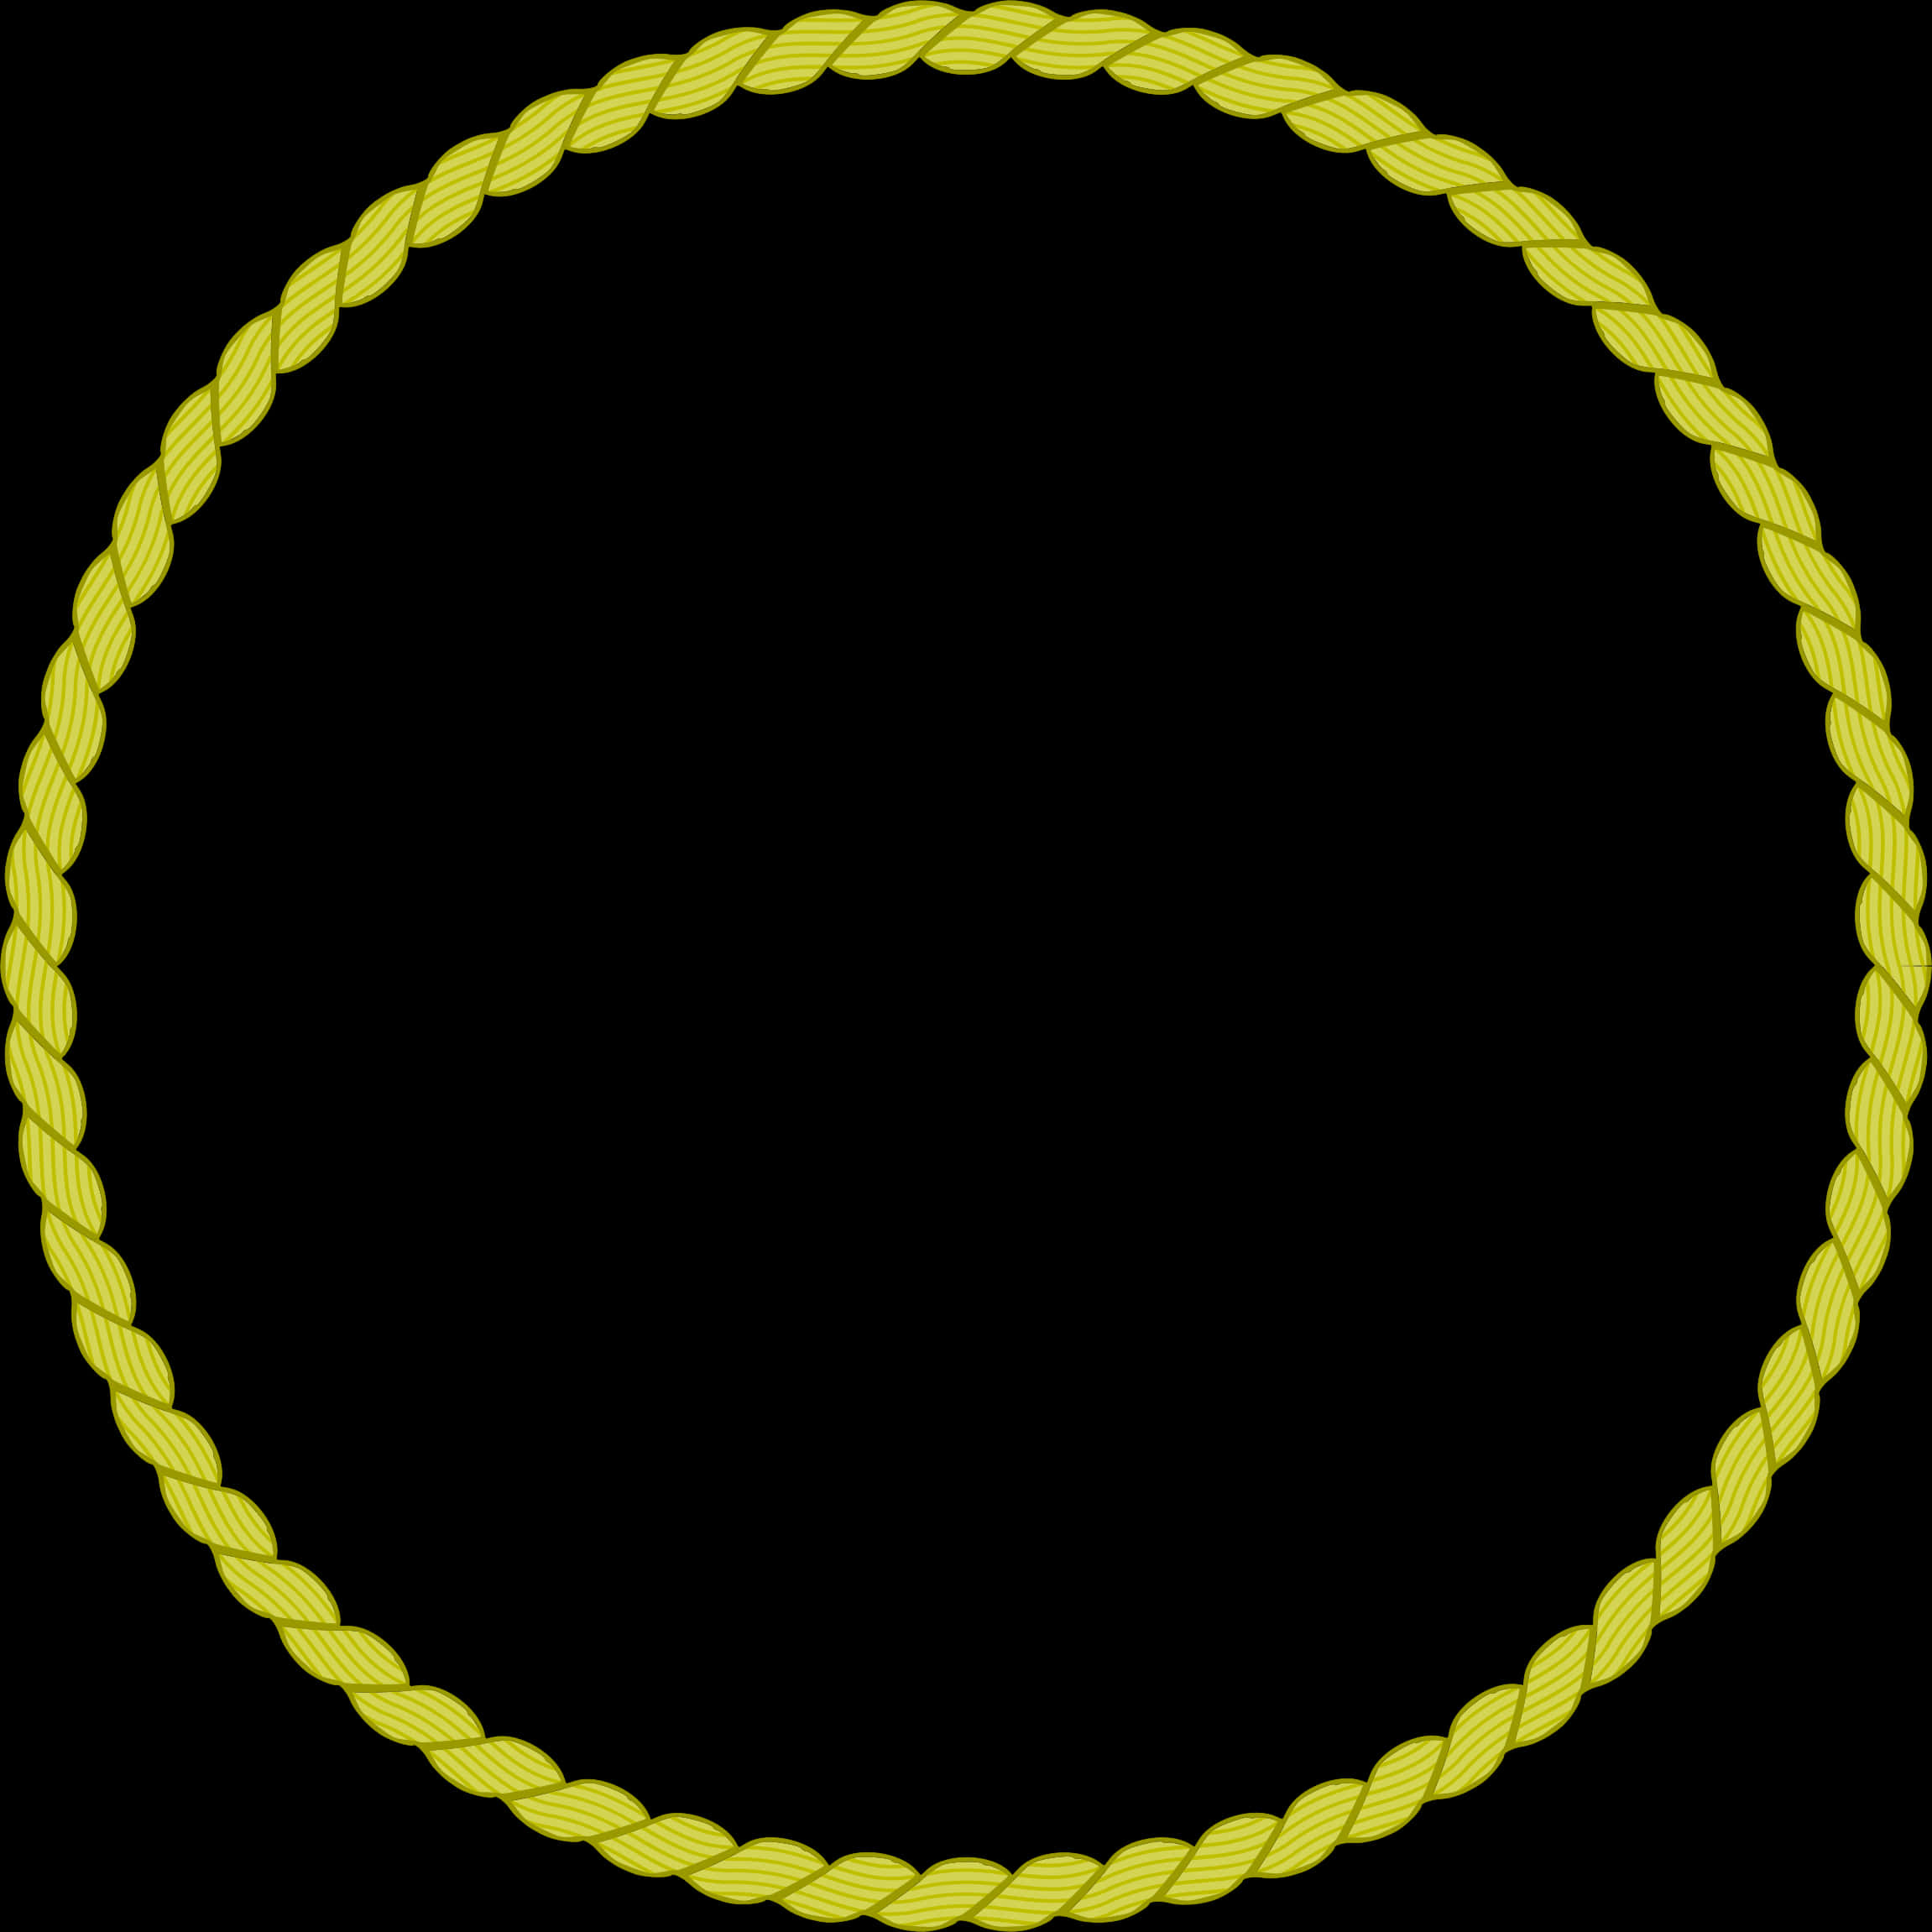 A Yellow Rope In A Circle